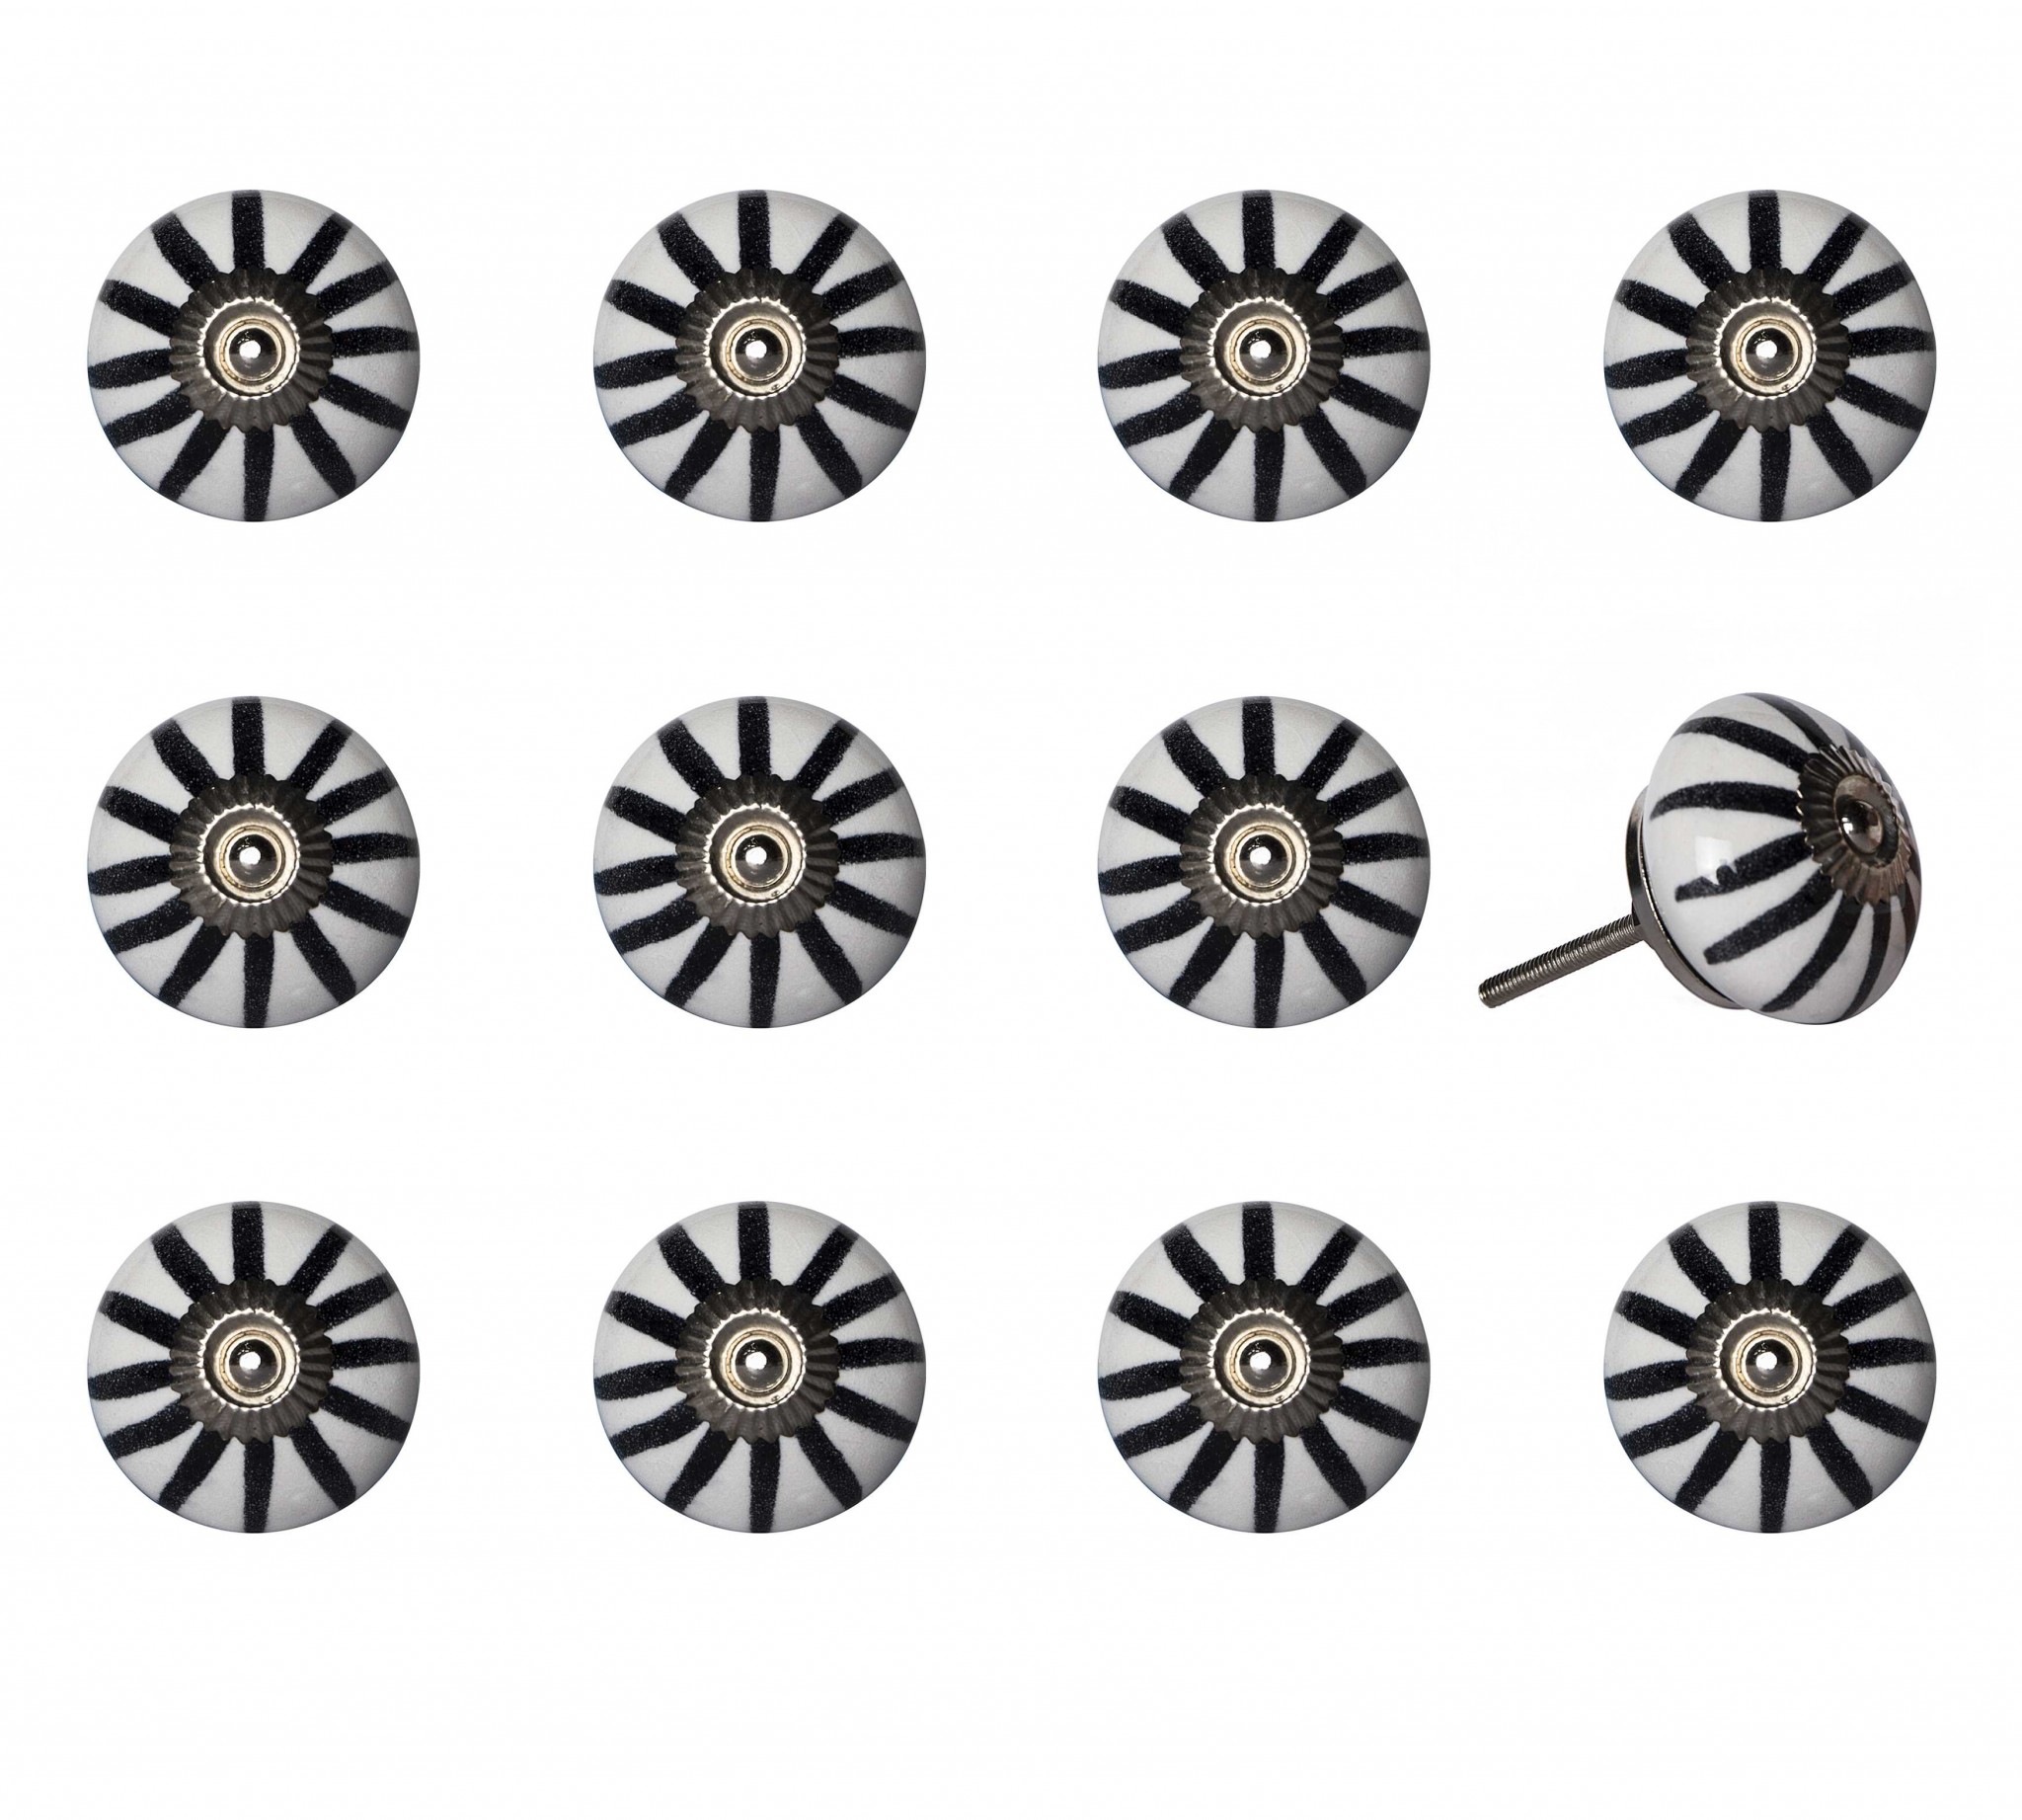 1.5" x 1.5" x 1.5" White, Black and Silver - Knobs 12-Pack